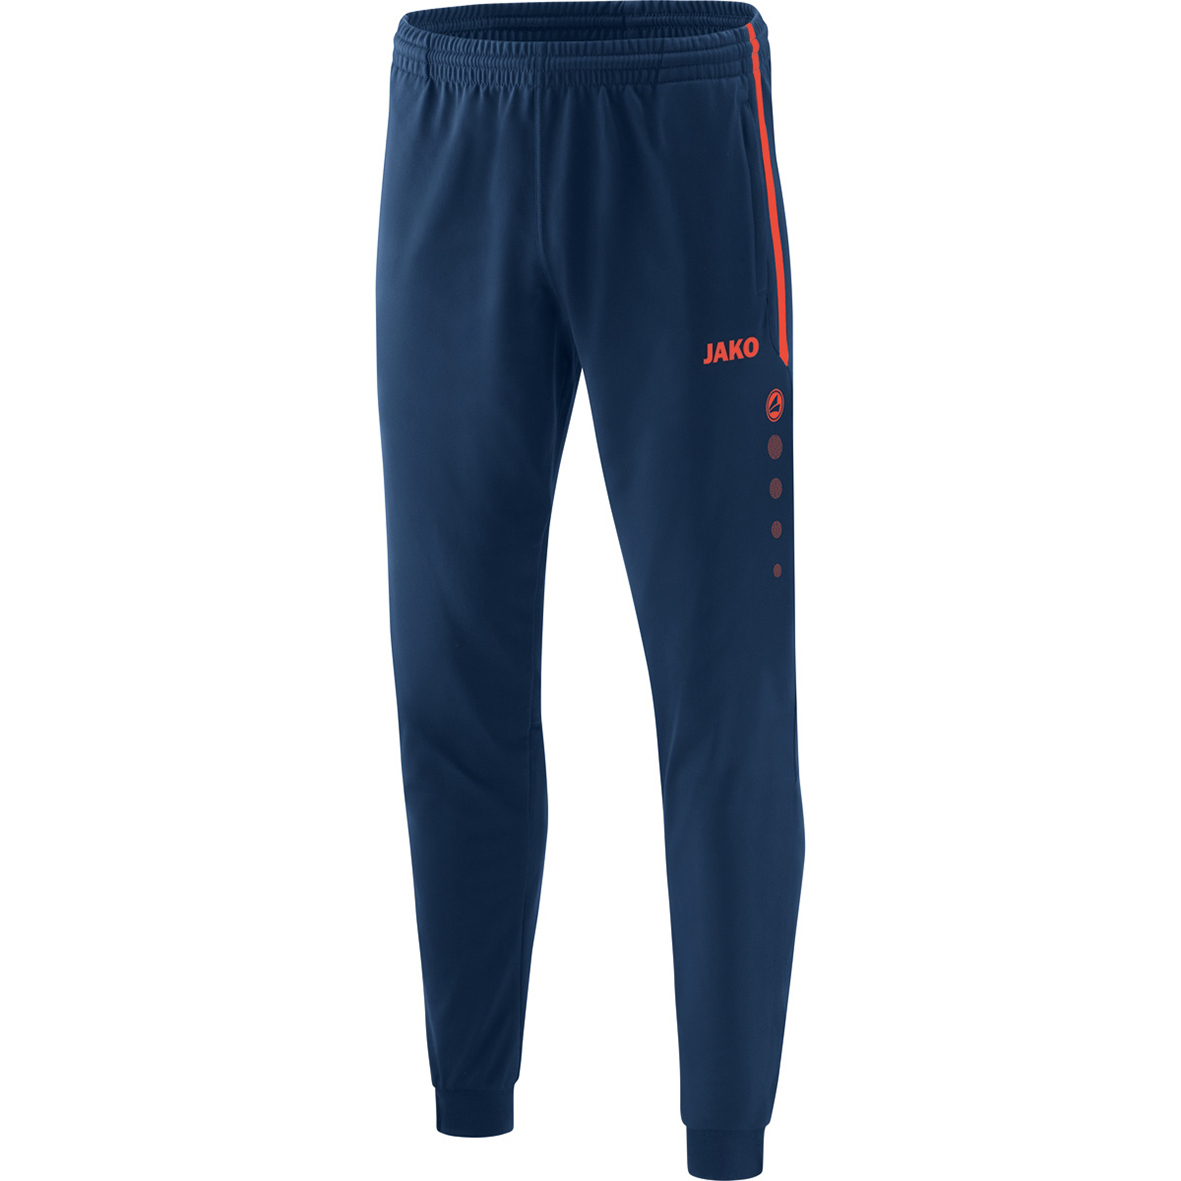 TROUSERS JAKO COMPETITION 2.0, NAVY-FLAME MEN.